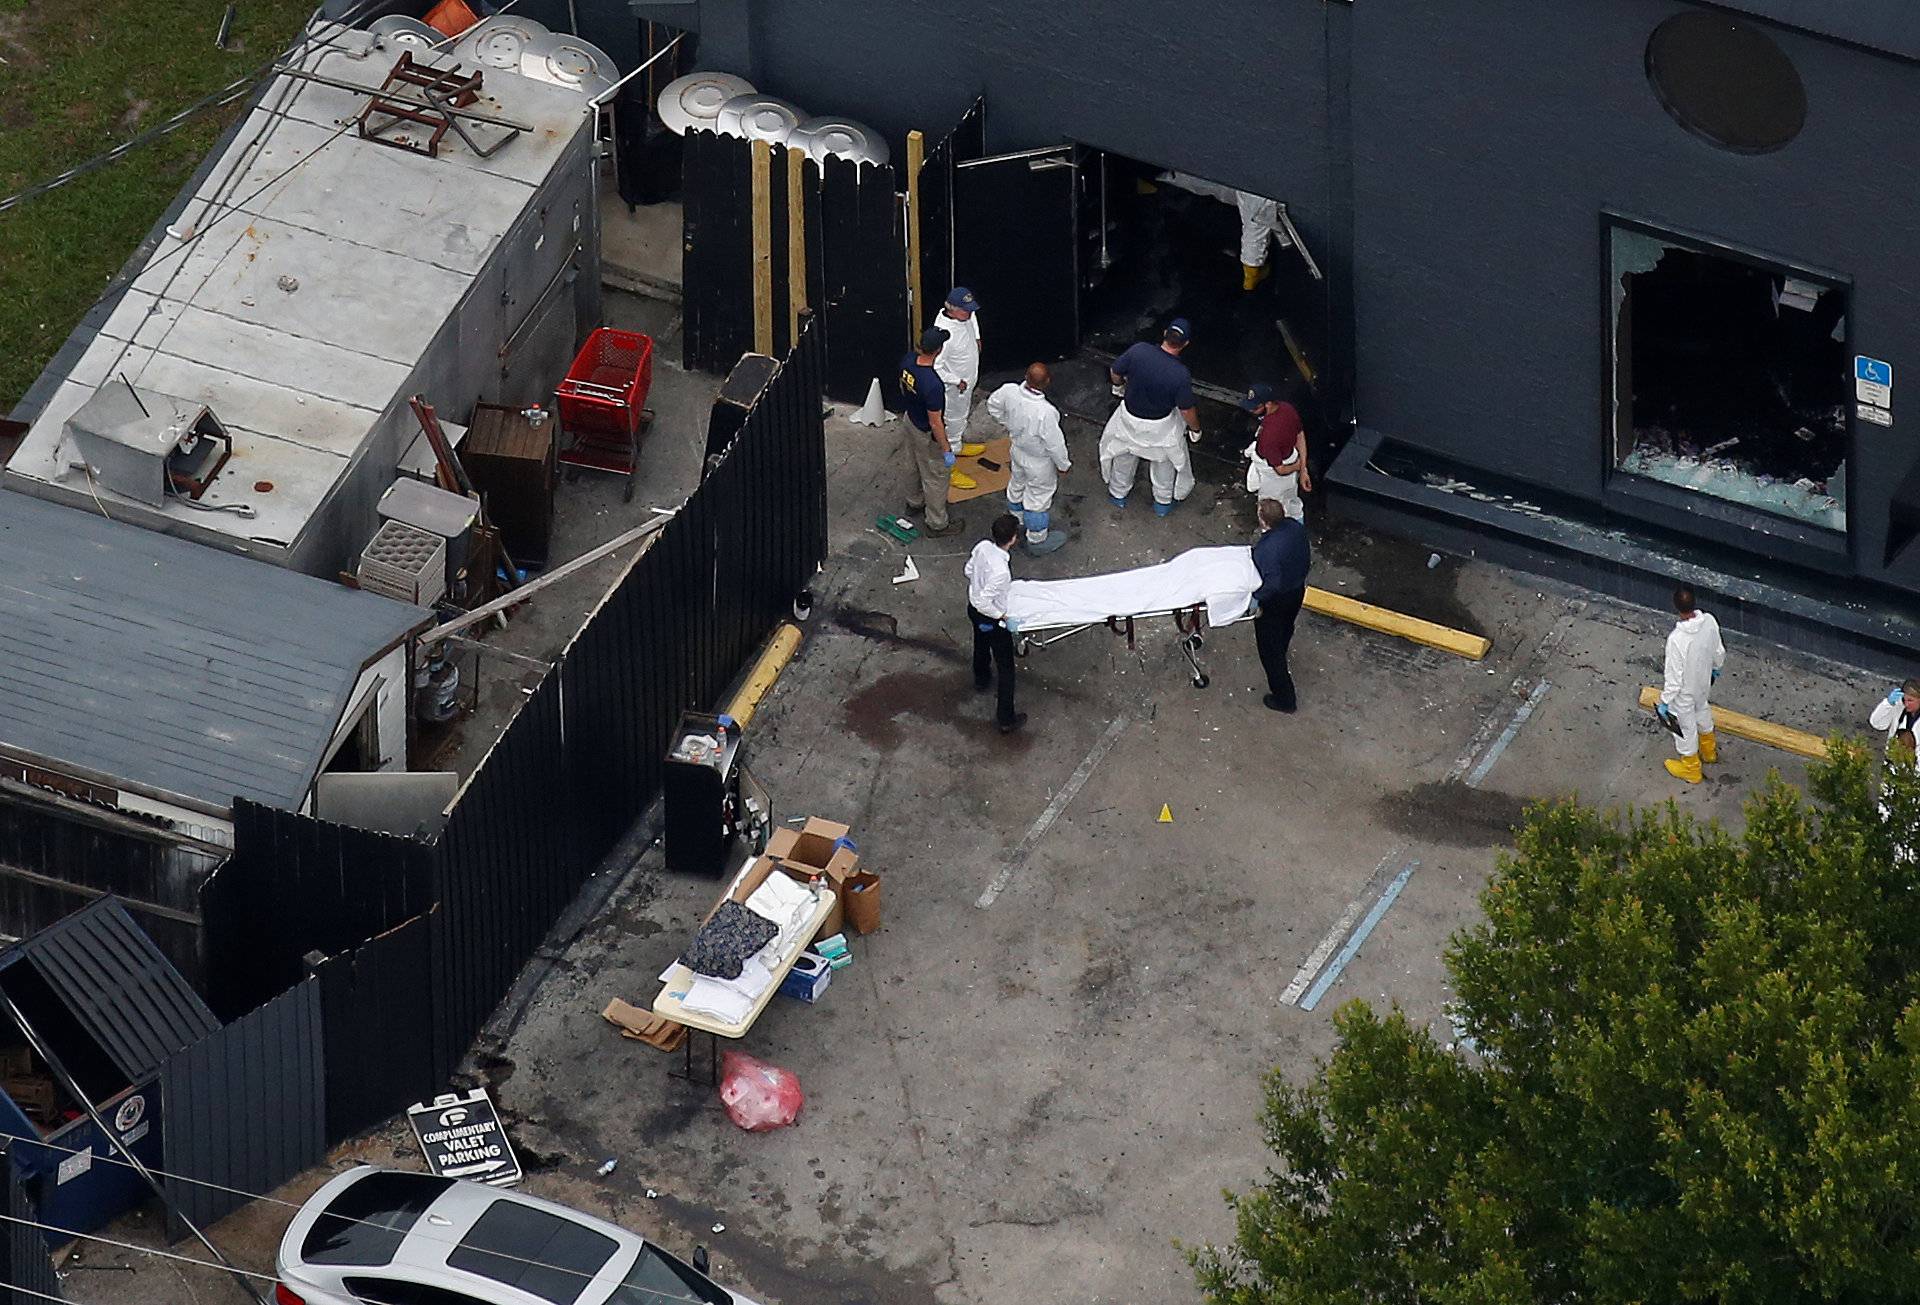 Investigators work the scene following a mass shooting at the Pulse gay nightclub in Orlando Florida